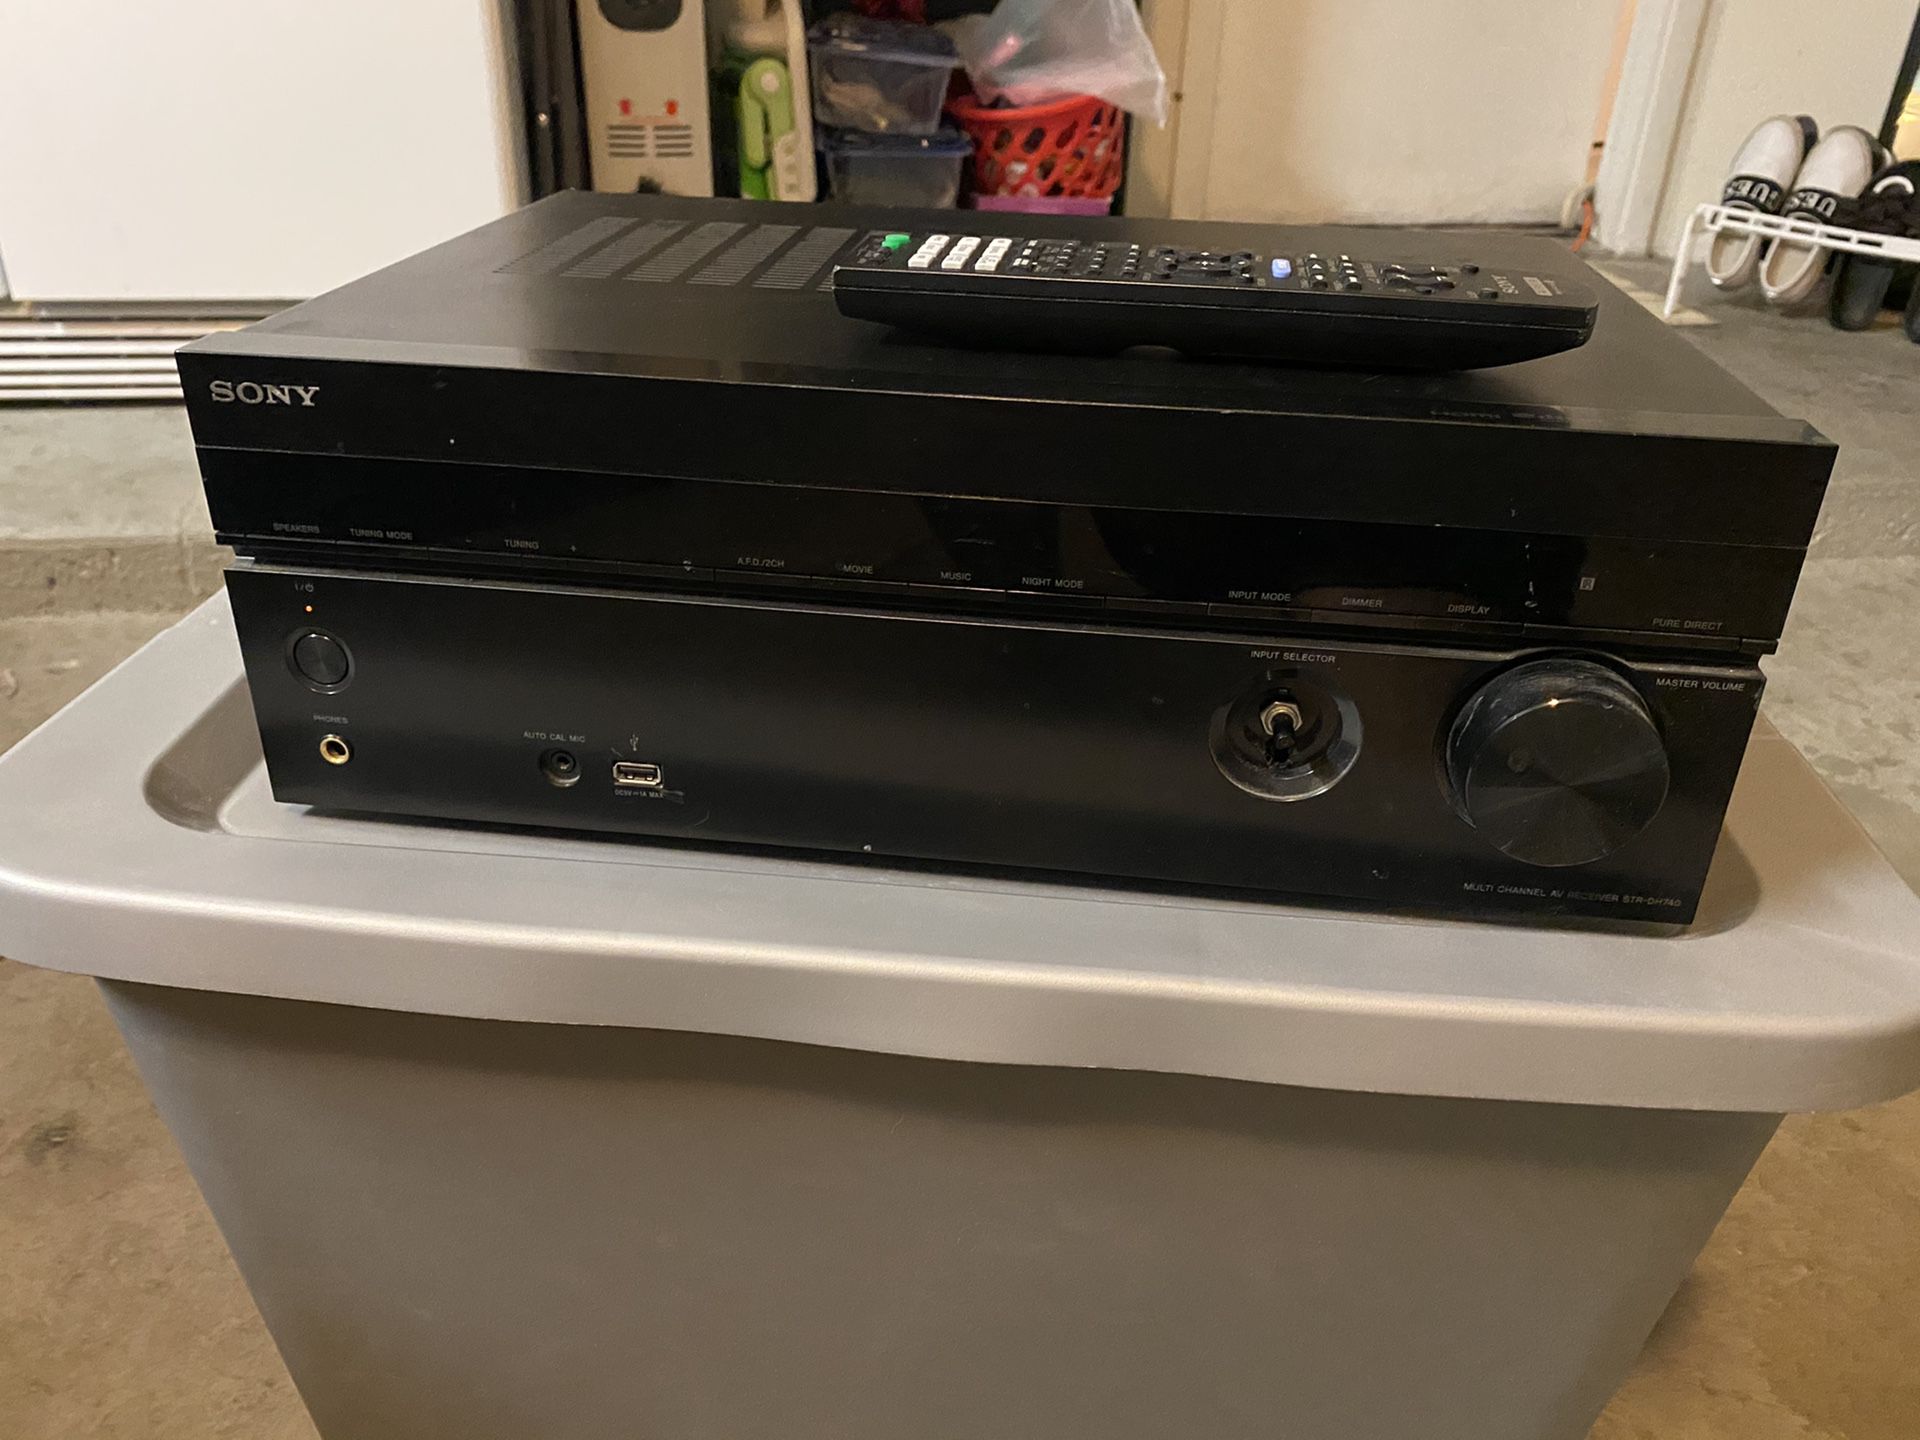 Sony Home Theater Receiver with Remote